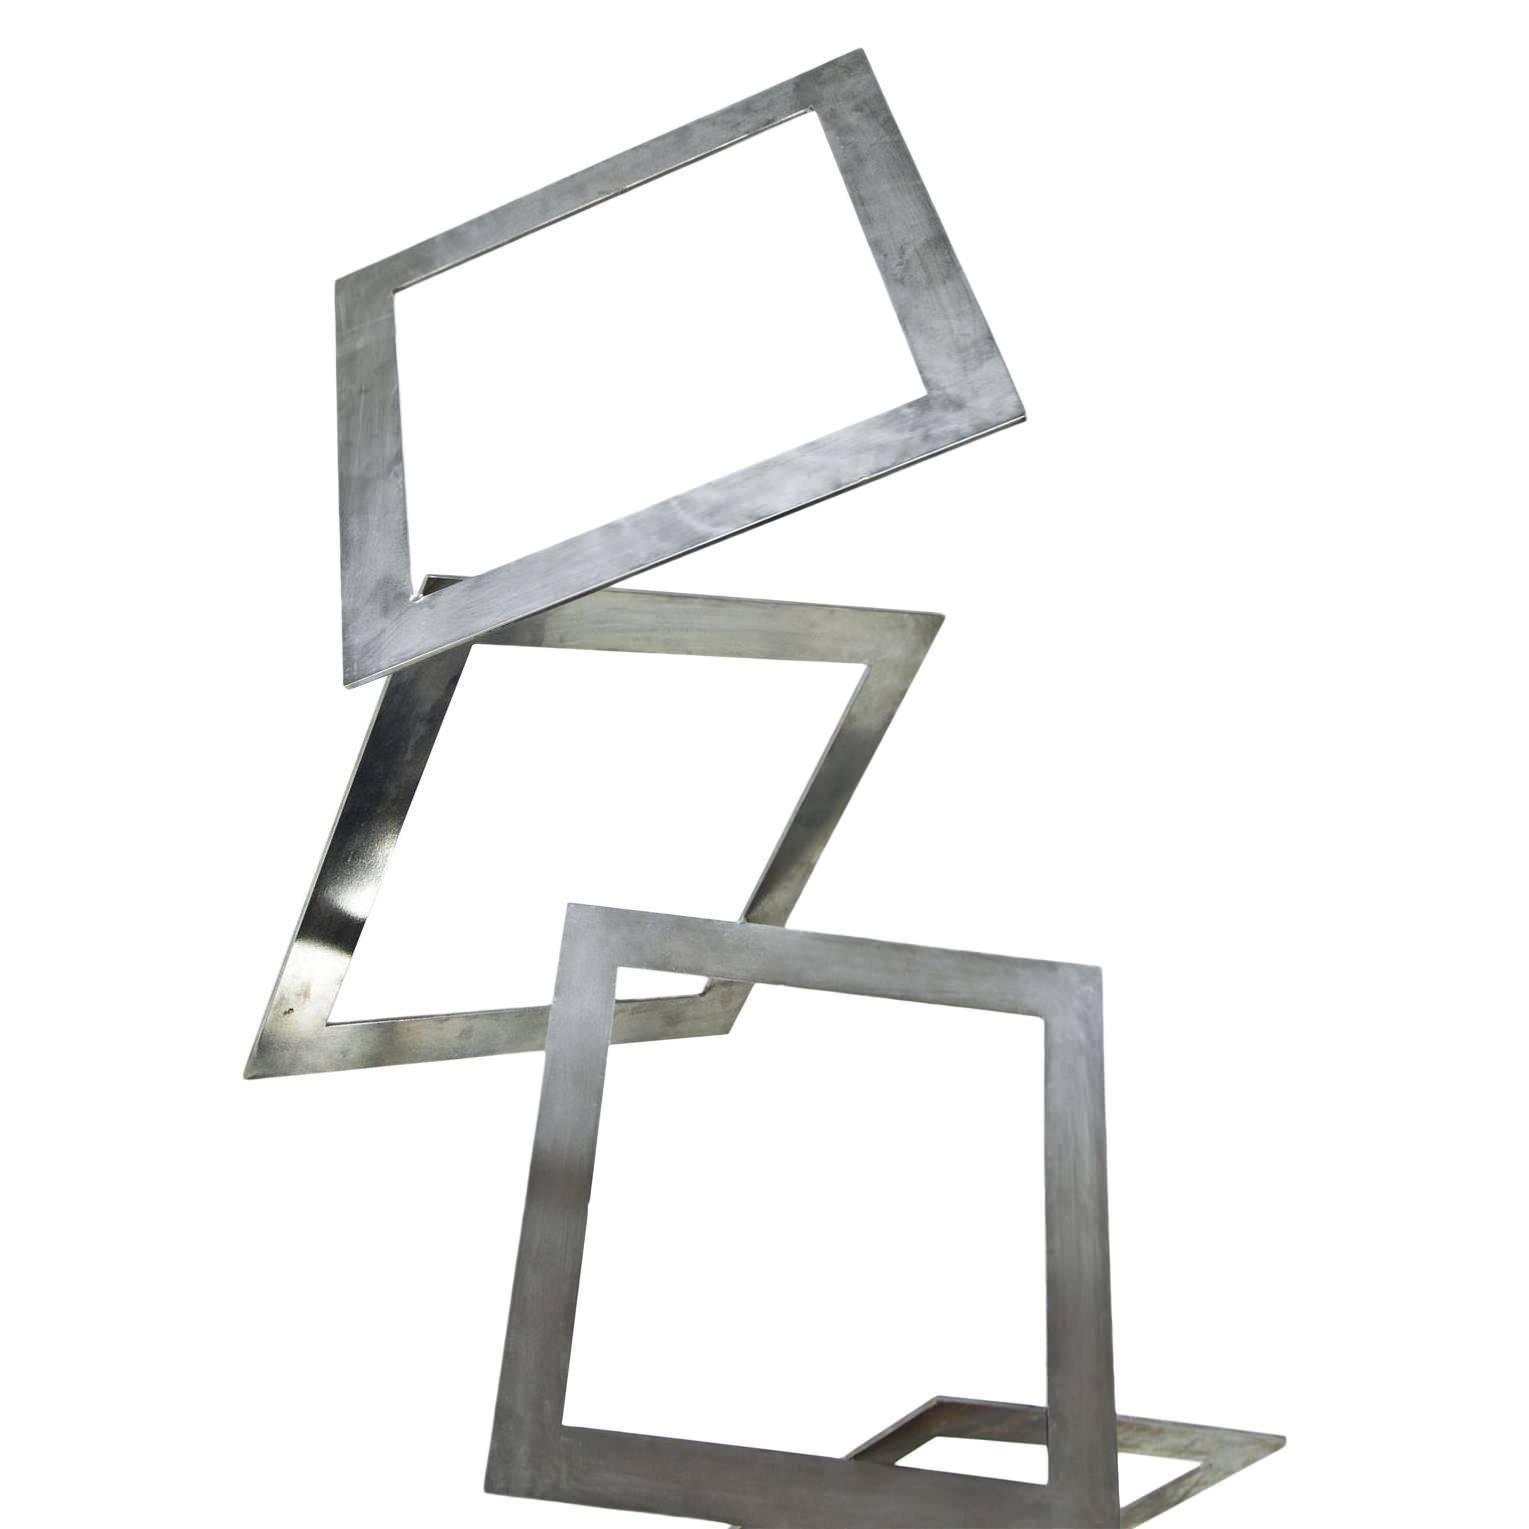 Metal sculpture by Ernesto Riva (born 1913) consisting of several metal squares which are welded together. The artist had not the construction itself in mind, but furthermore the effect it has on its surroundings. Positive and negative volumes